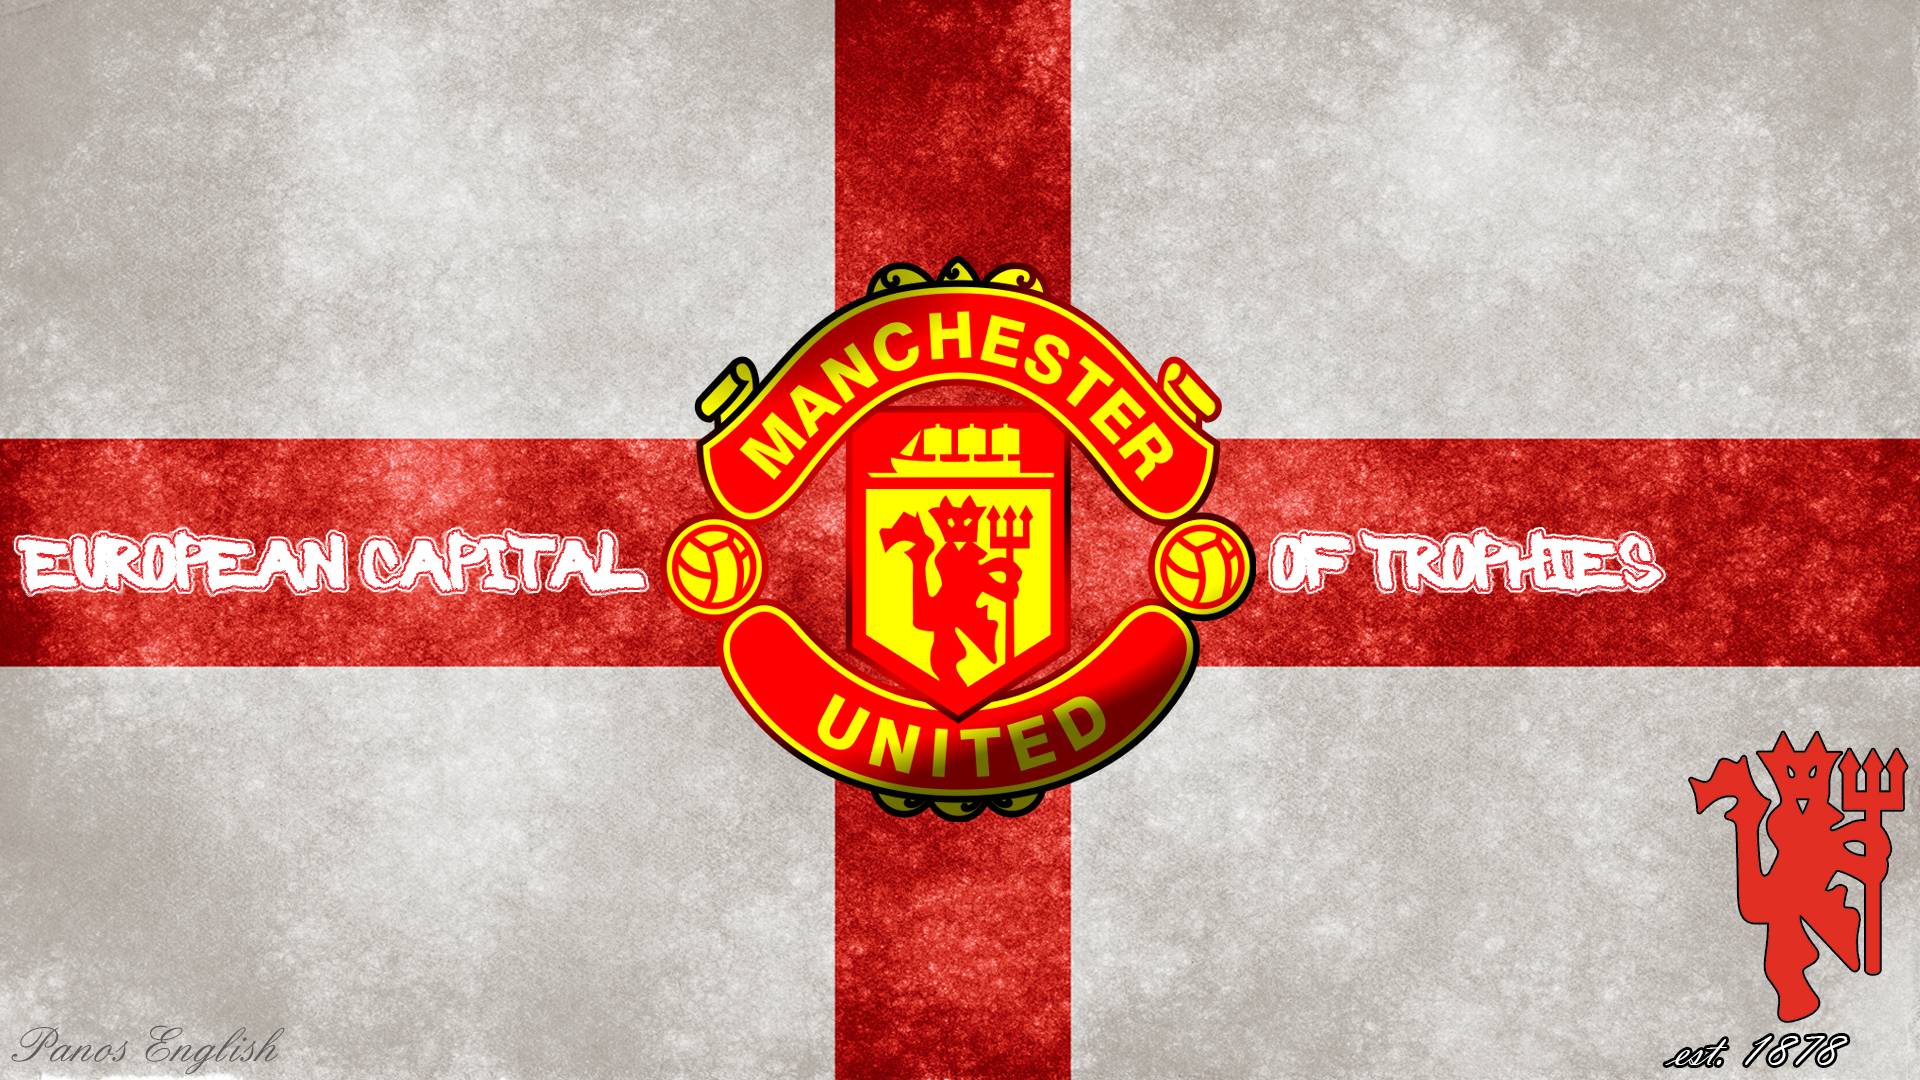 manchester united picture